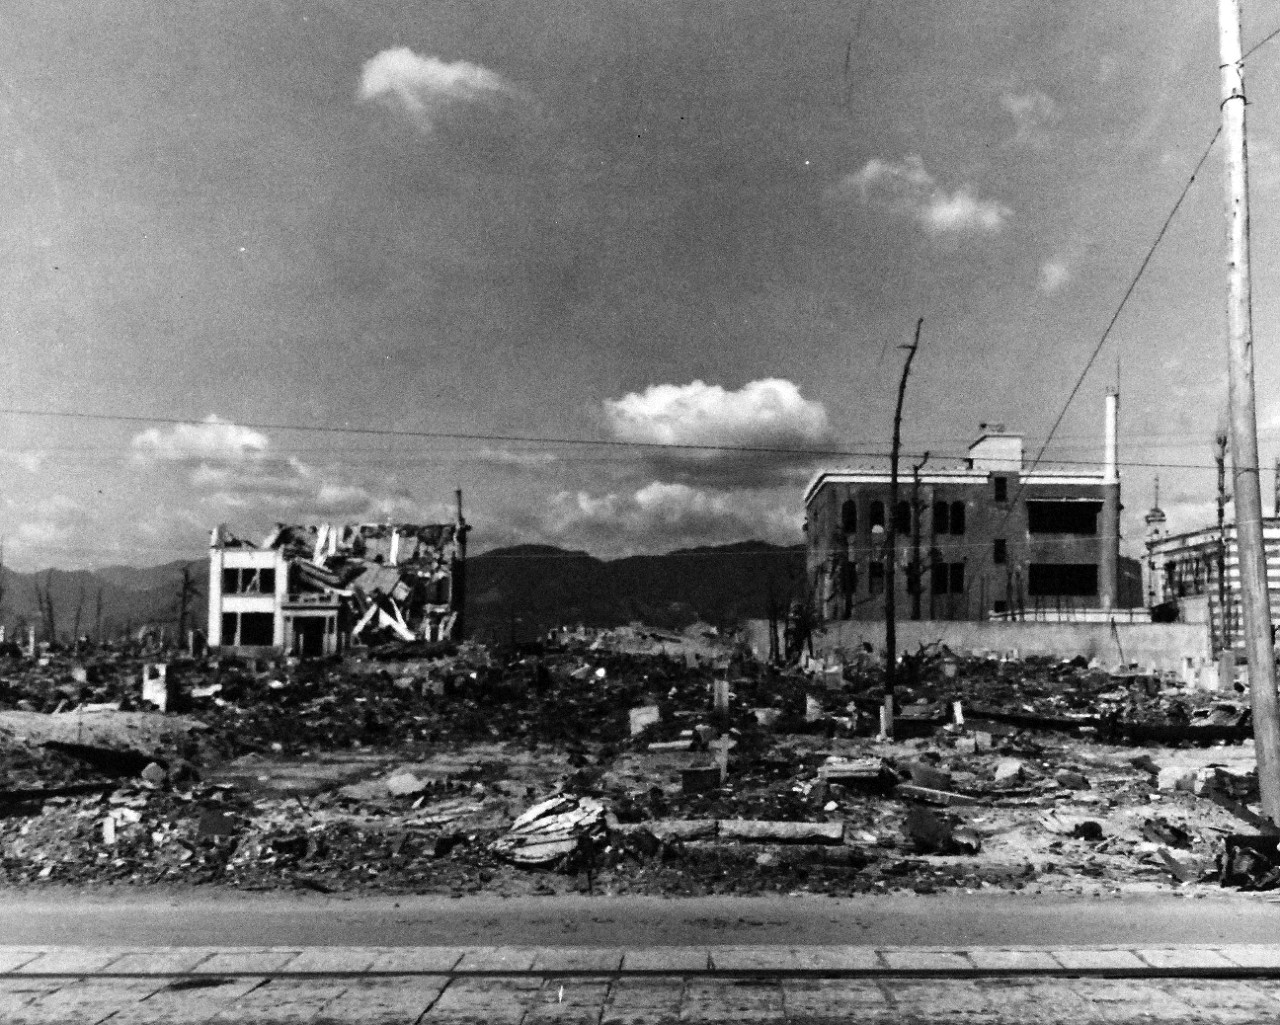 80-G-373265:  Hiroshima, Japan, 1945.   Atomic Bomb damage to Hiroshima, Japan.  Photograph released, October 14, 1945.  U.S. Navy Photograph, now in the collections of the National Archives. (2015/12/08).